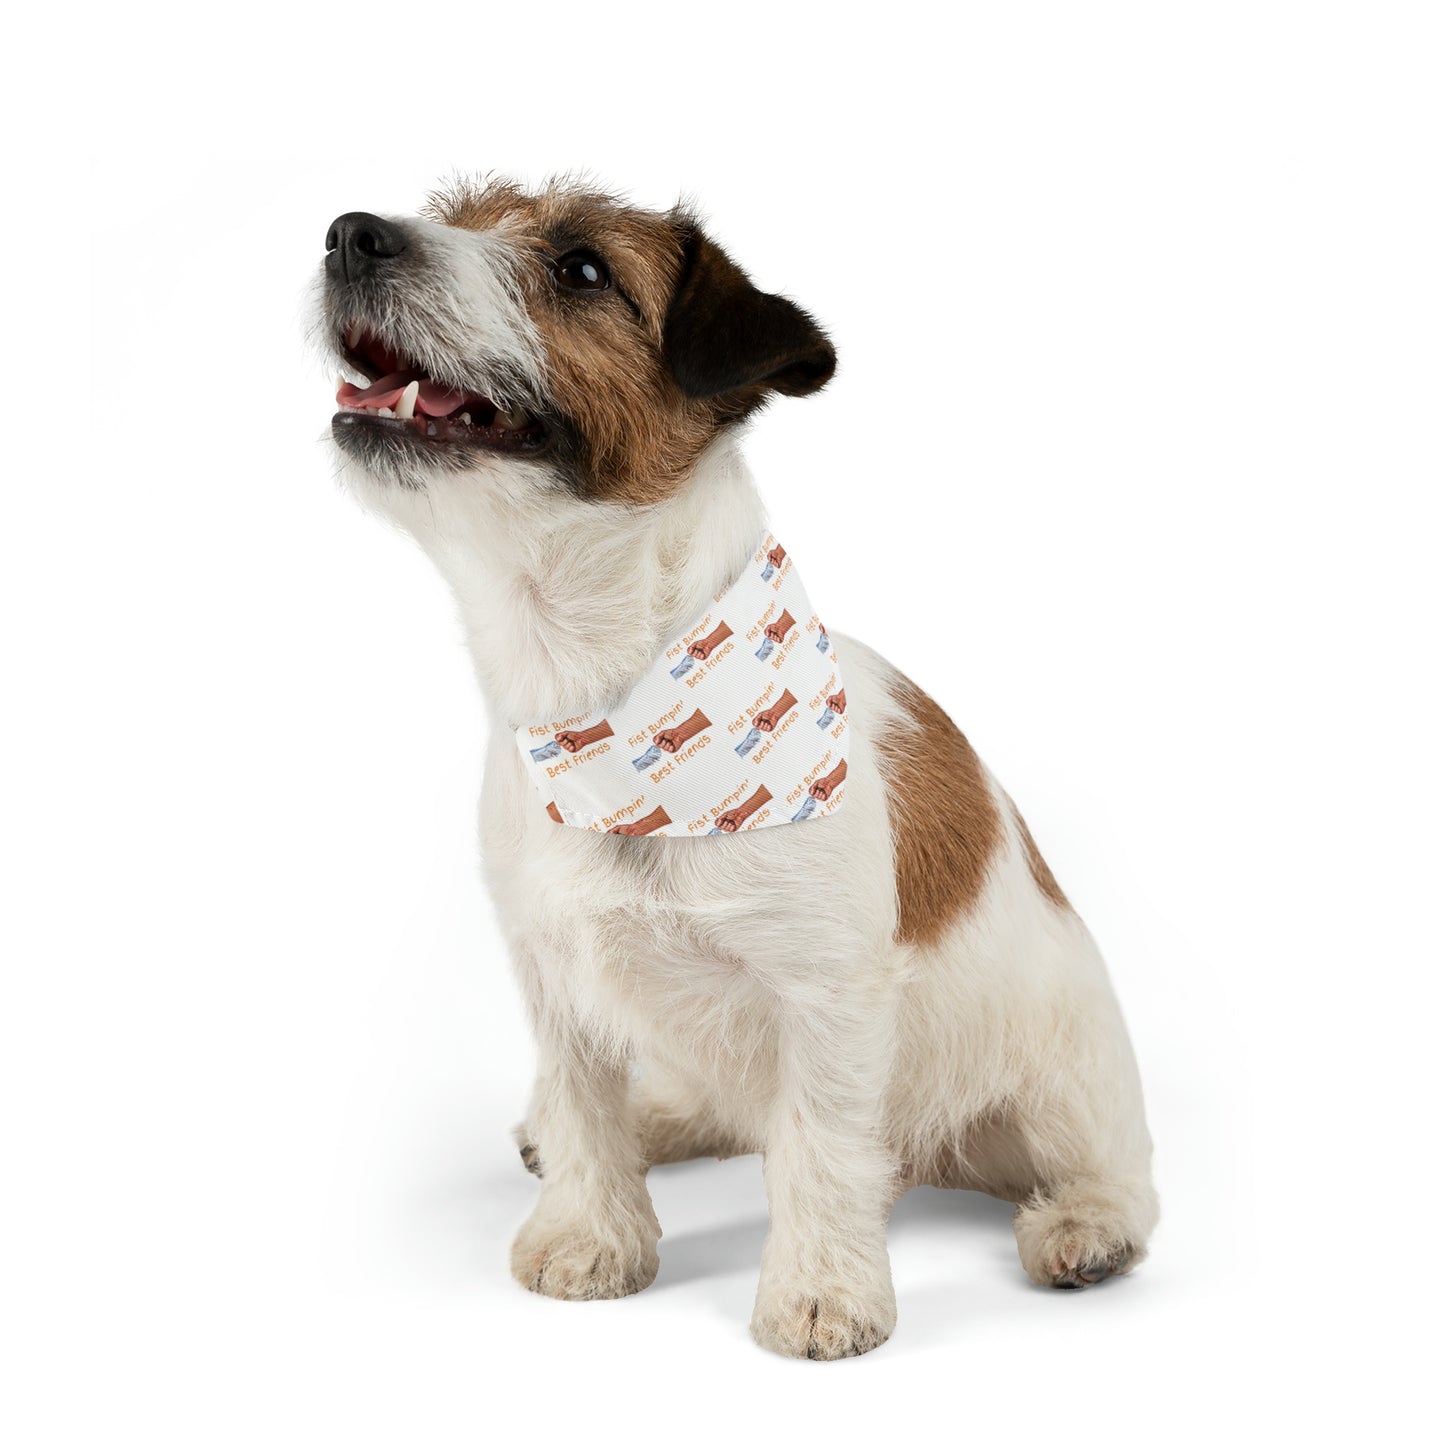 Fist Bumpin’ Best Friends Opie’s Cavalier King Charles Spaniel Pet Bandana Collar White with Gold lettering.